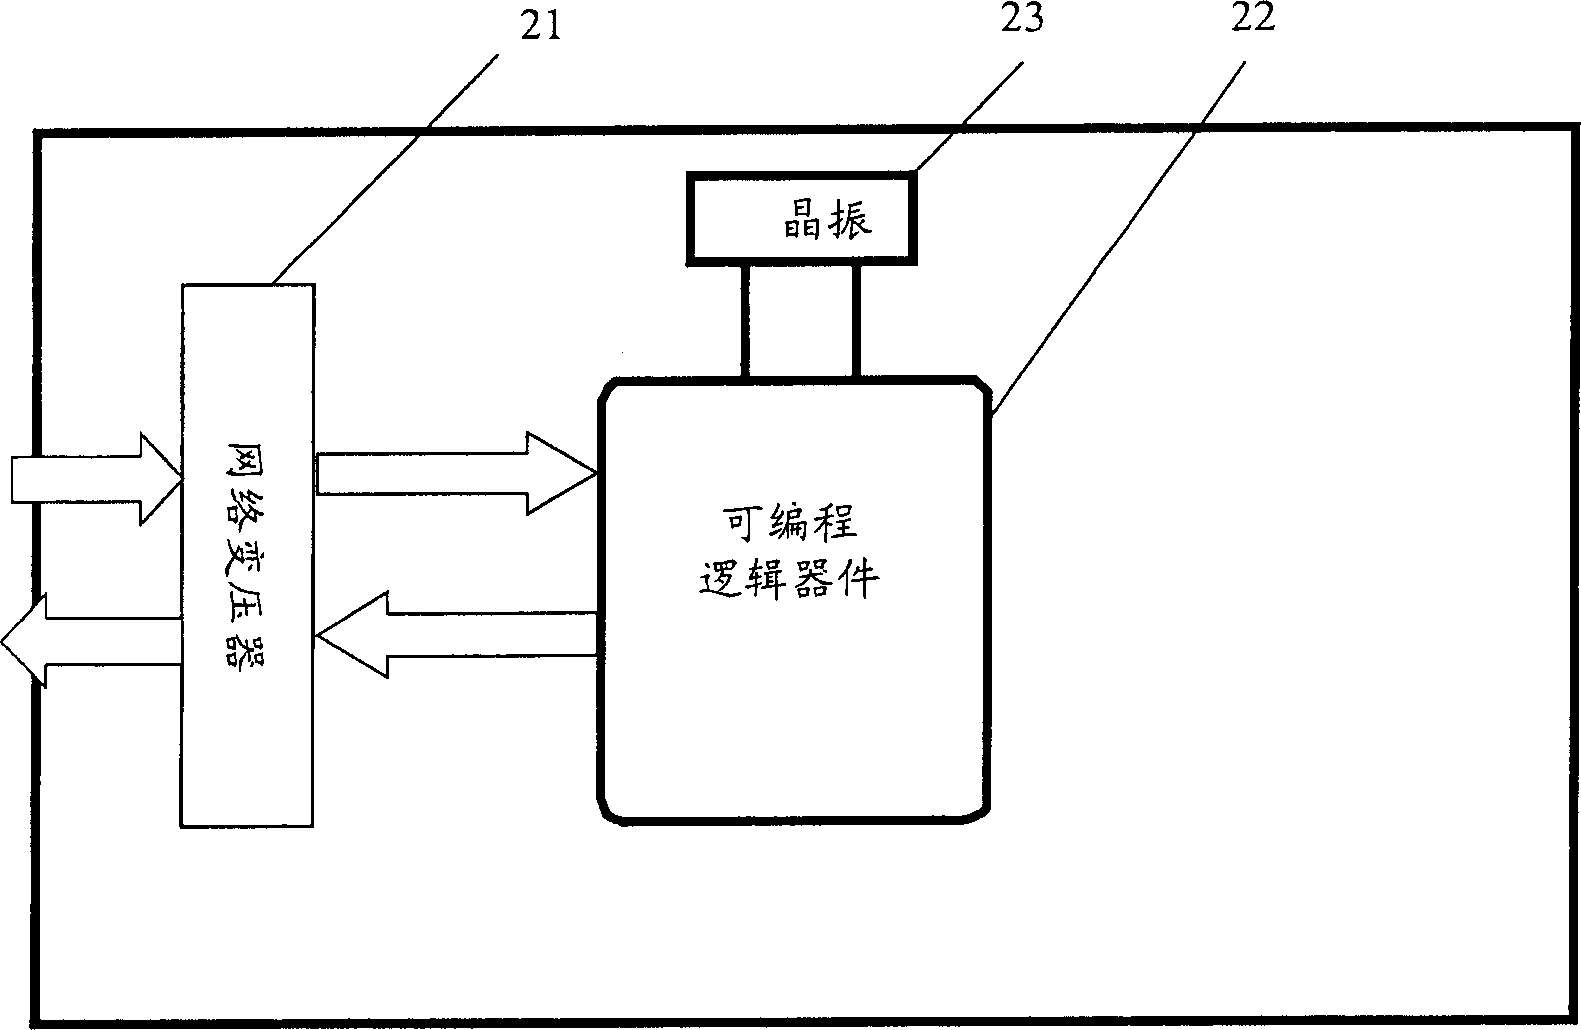 Ethernet signal processor and Ethernet signal processing method